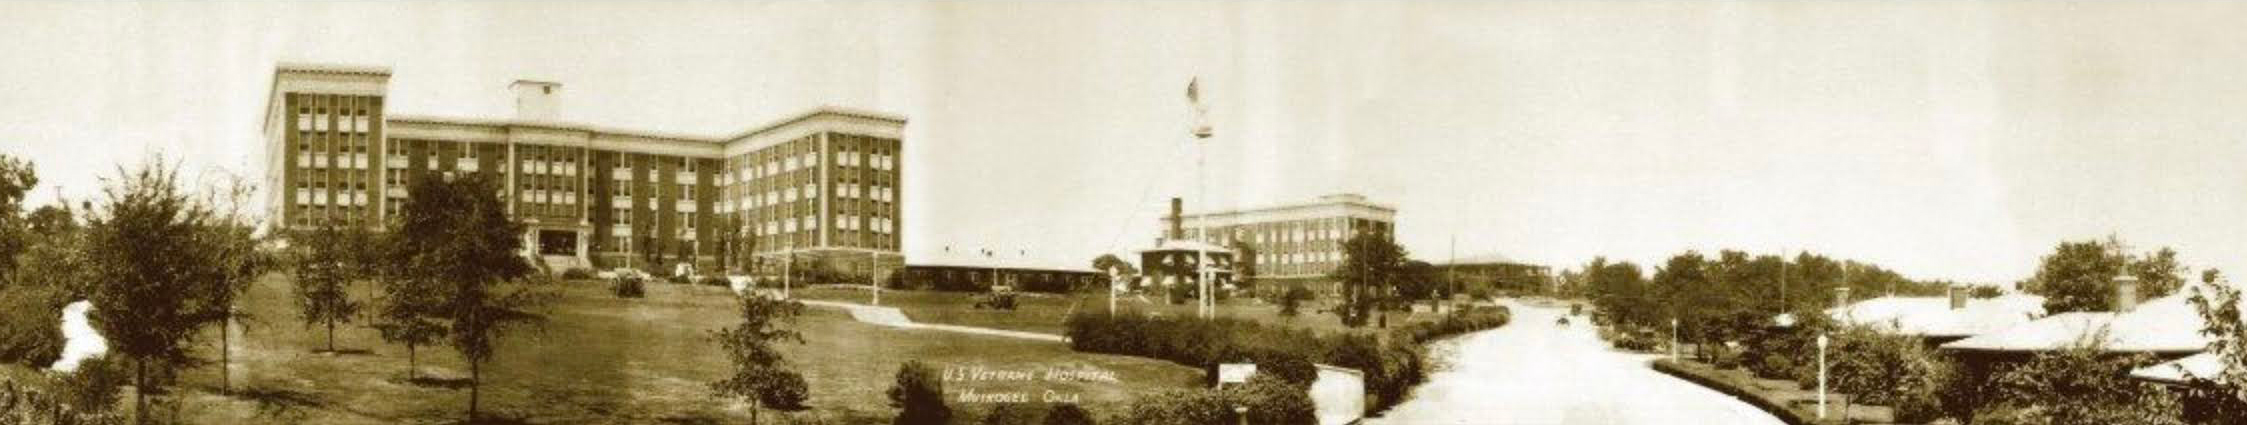 A photo of the VA hospital in Muskogee, Oklahoma, circa 1924. Credit: Courtesy of the Department of Veterans Affairs